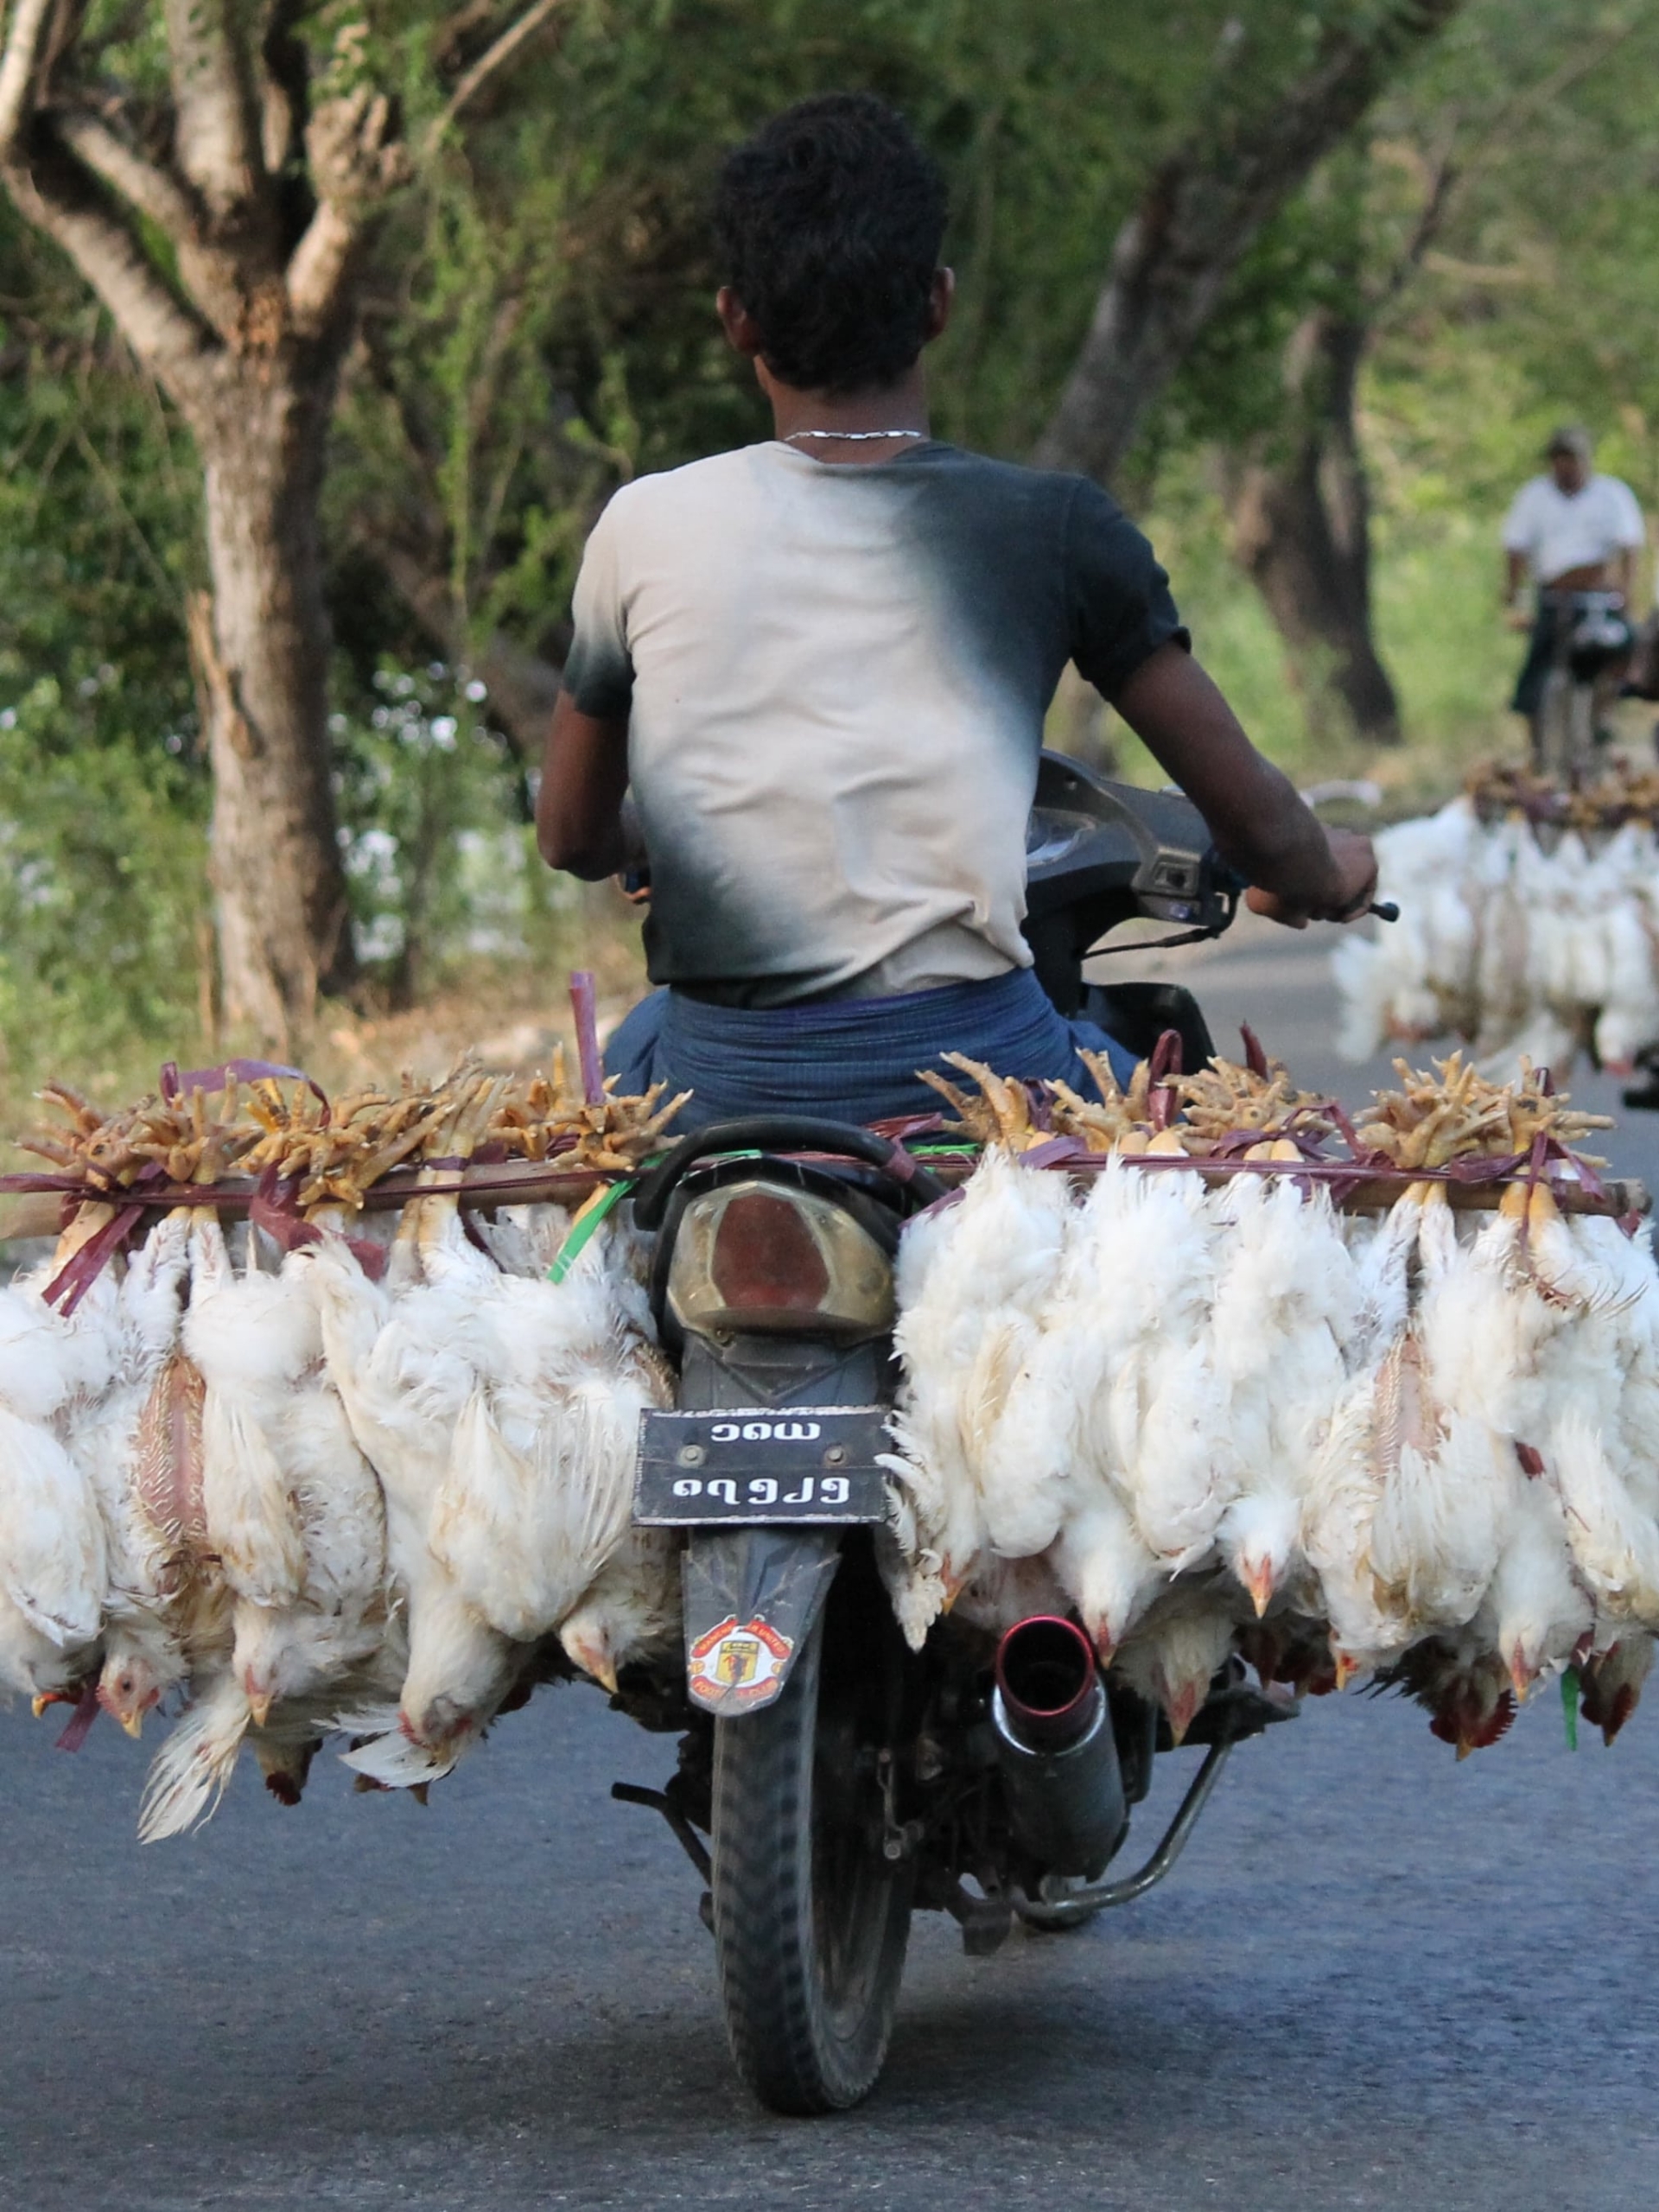 A person transporting chicken carcasses on a motorcycle